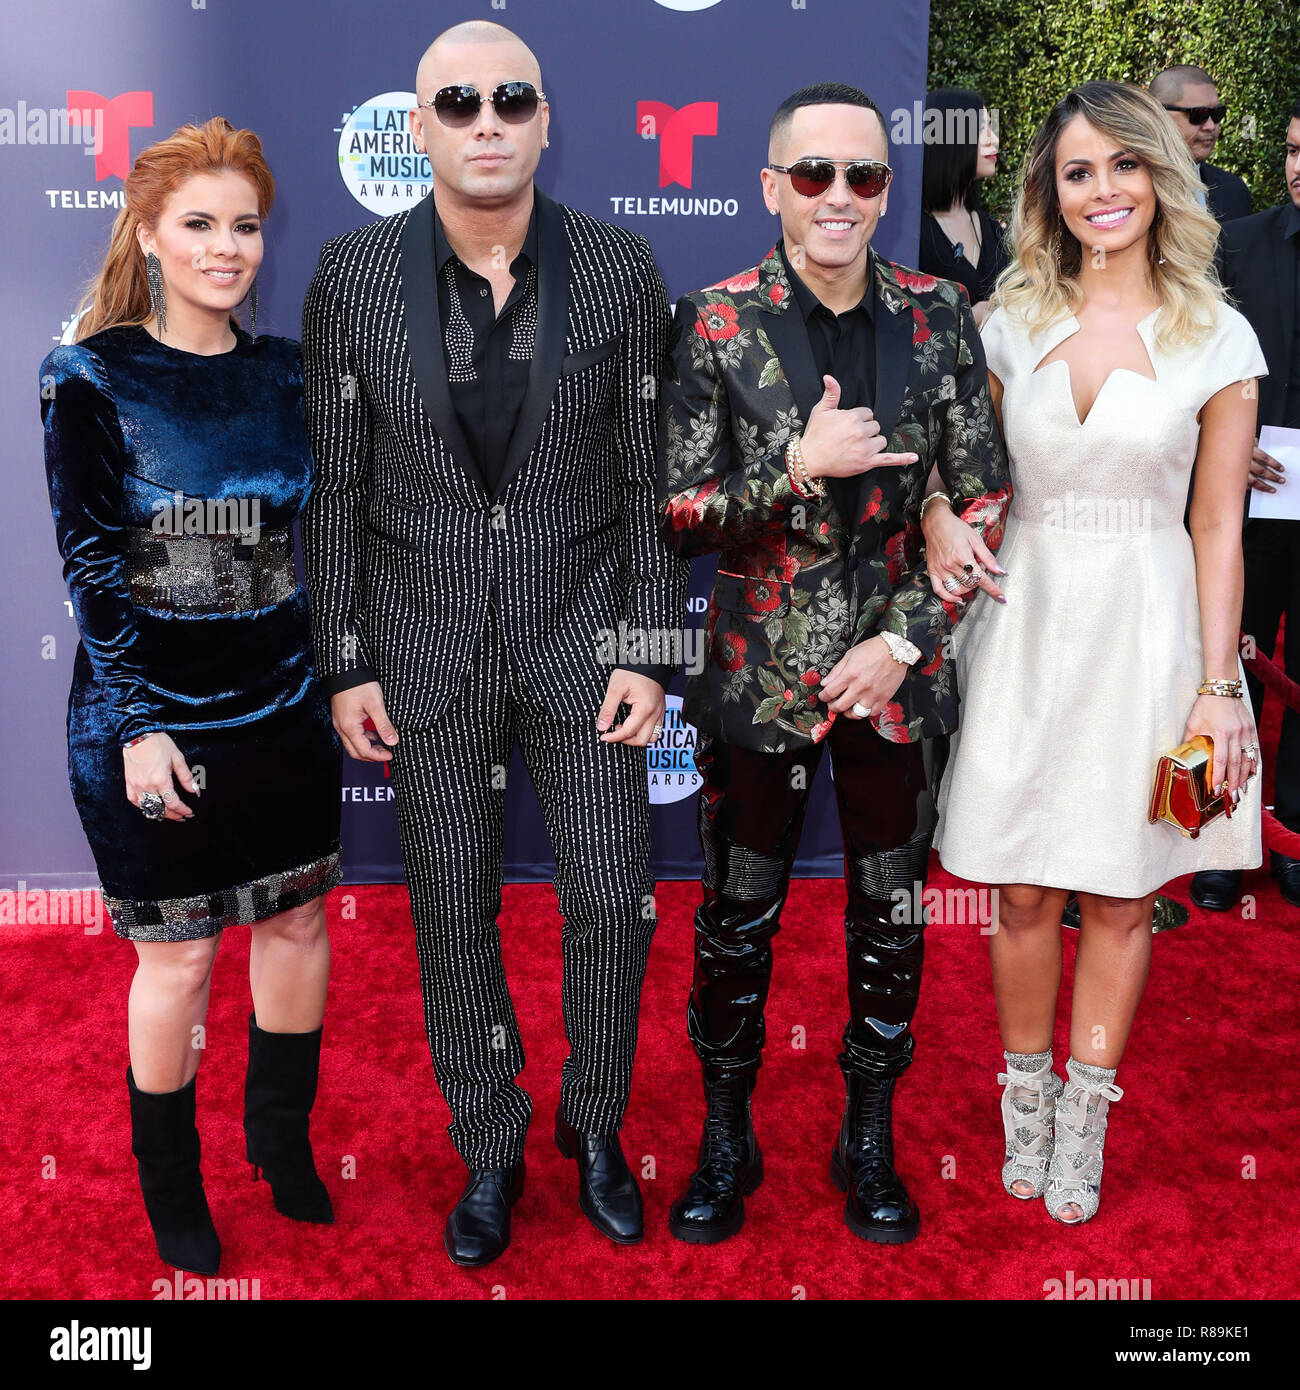 HOLLYWOOD, LOS ANGELES, CA, USA - OCTOBER 25: Yomaira Ortiz Feliciano, Wisin, Yandel, Edneris Espada Figueroa, Wisin Y Yandel at the 2018 Latin American Music Awards held at the Dolby Theatre on October 25, 2018 in Hollywood, Los Angeles, California, United States. (Photo by Xavier Collin/Image Press Agency) Stock Photo